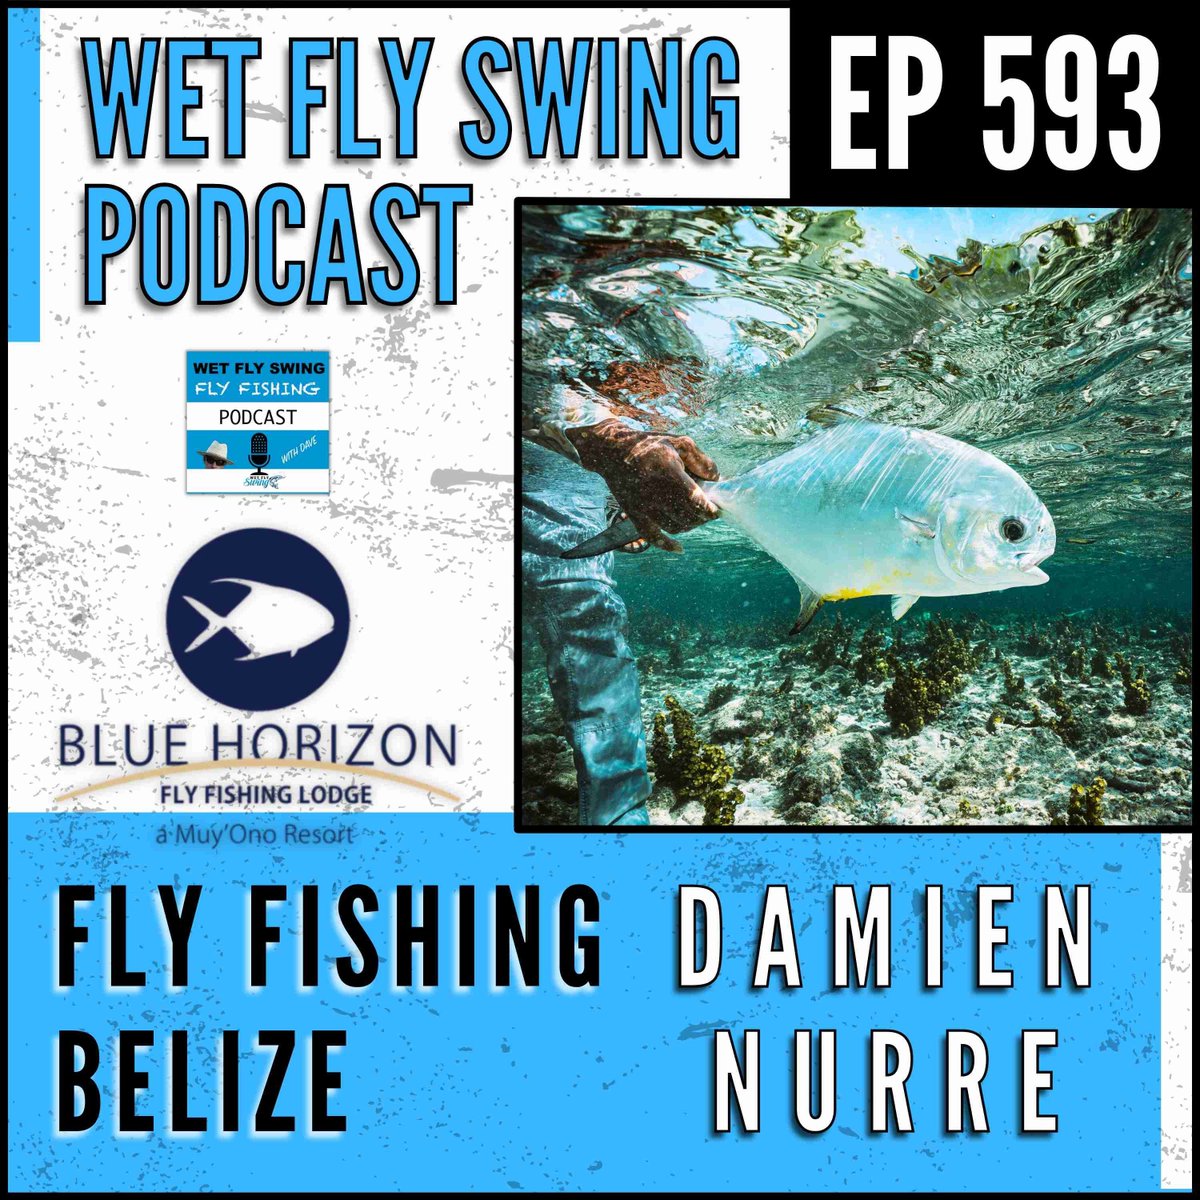 Join Damien Nurre on our latest episode as he takes us from the slopes to the tropics, sharing the magic of @bluehorizonfly. 🎧 Listen here >> buff.ly/3vMxyuu